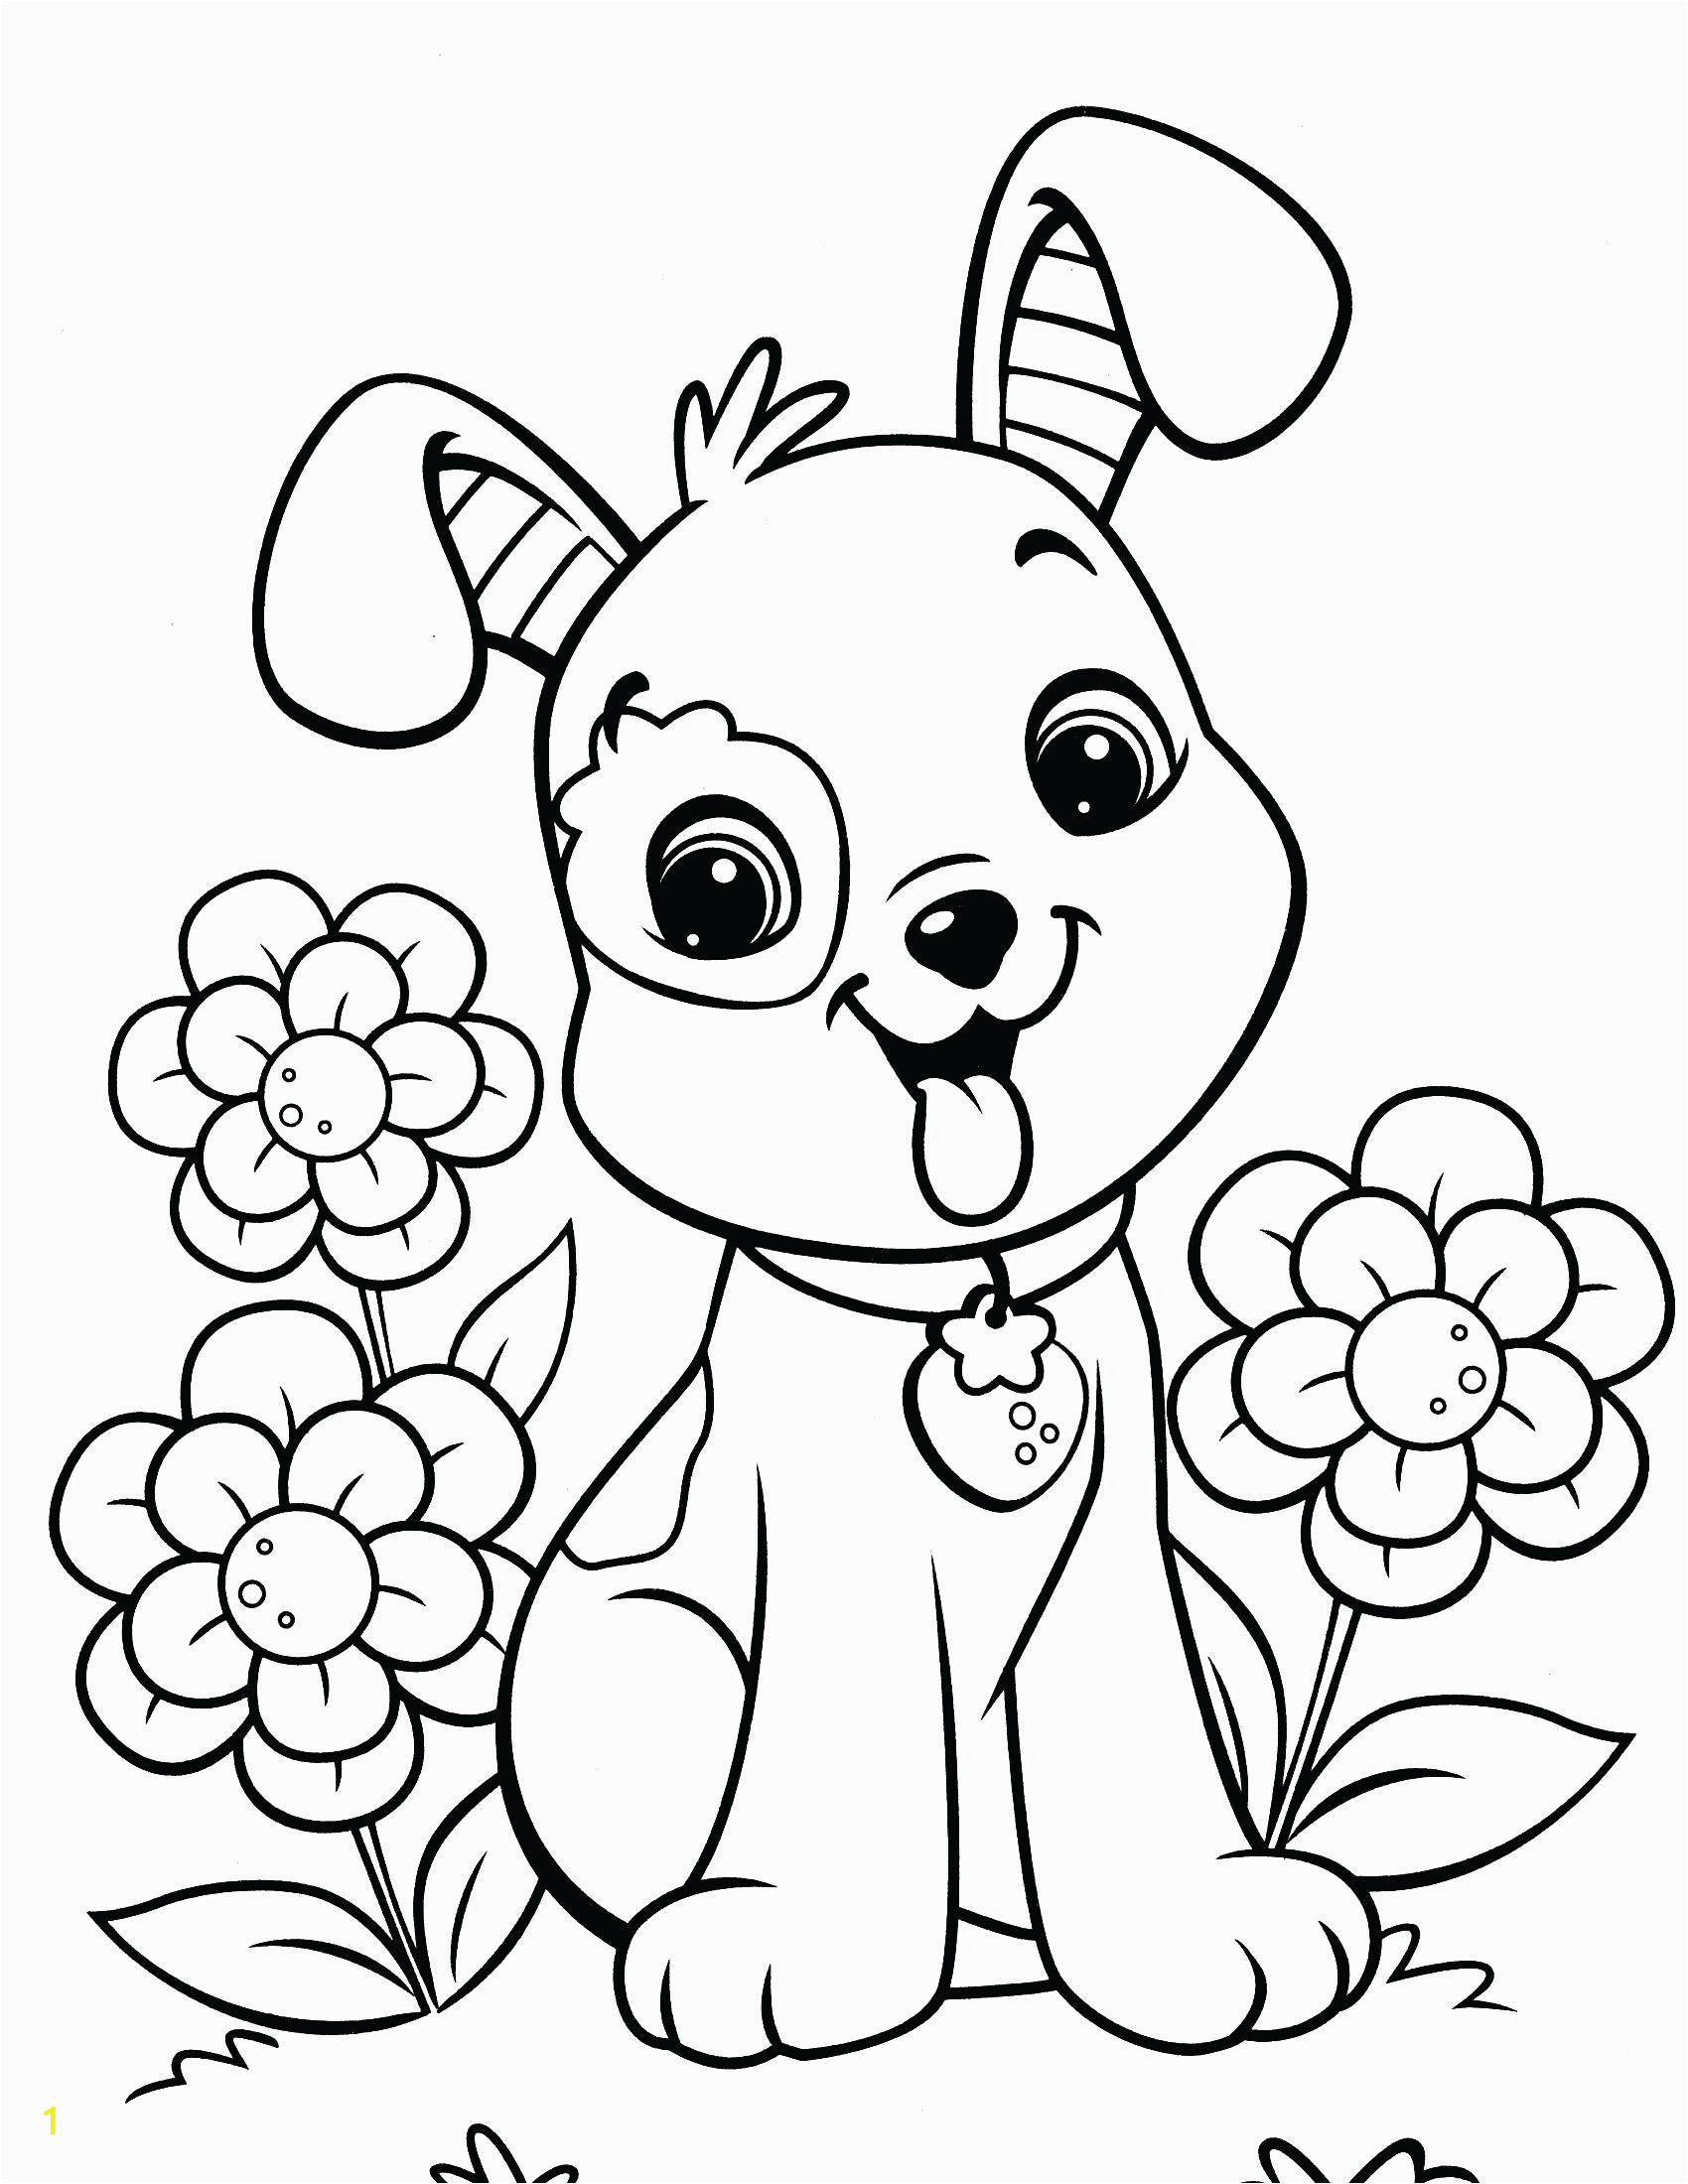 Puppies and Kitties Coloring Pages top 49 Killer Incredible Preschool Coloring Pages Free